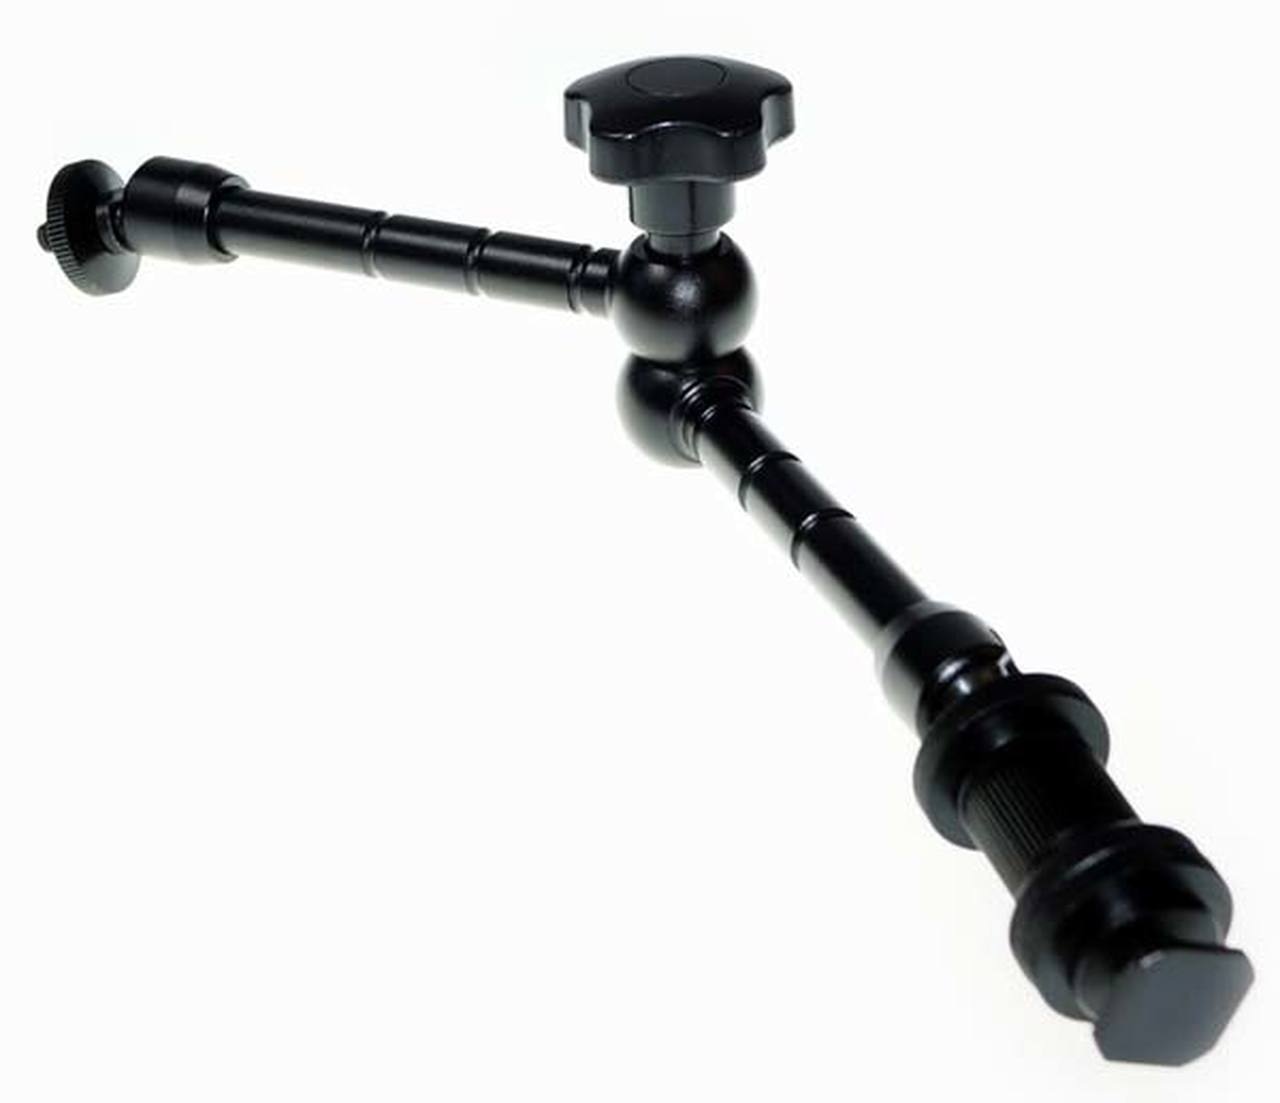 Promaster 3739 11" Articulating Arm w/ Shoe Mount